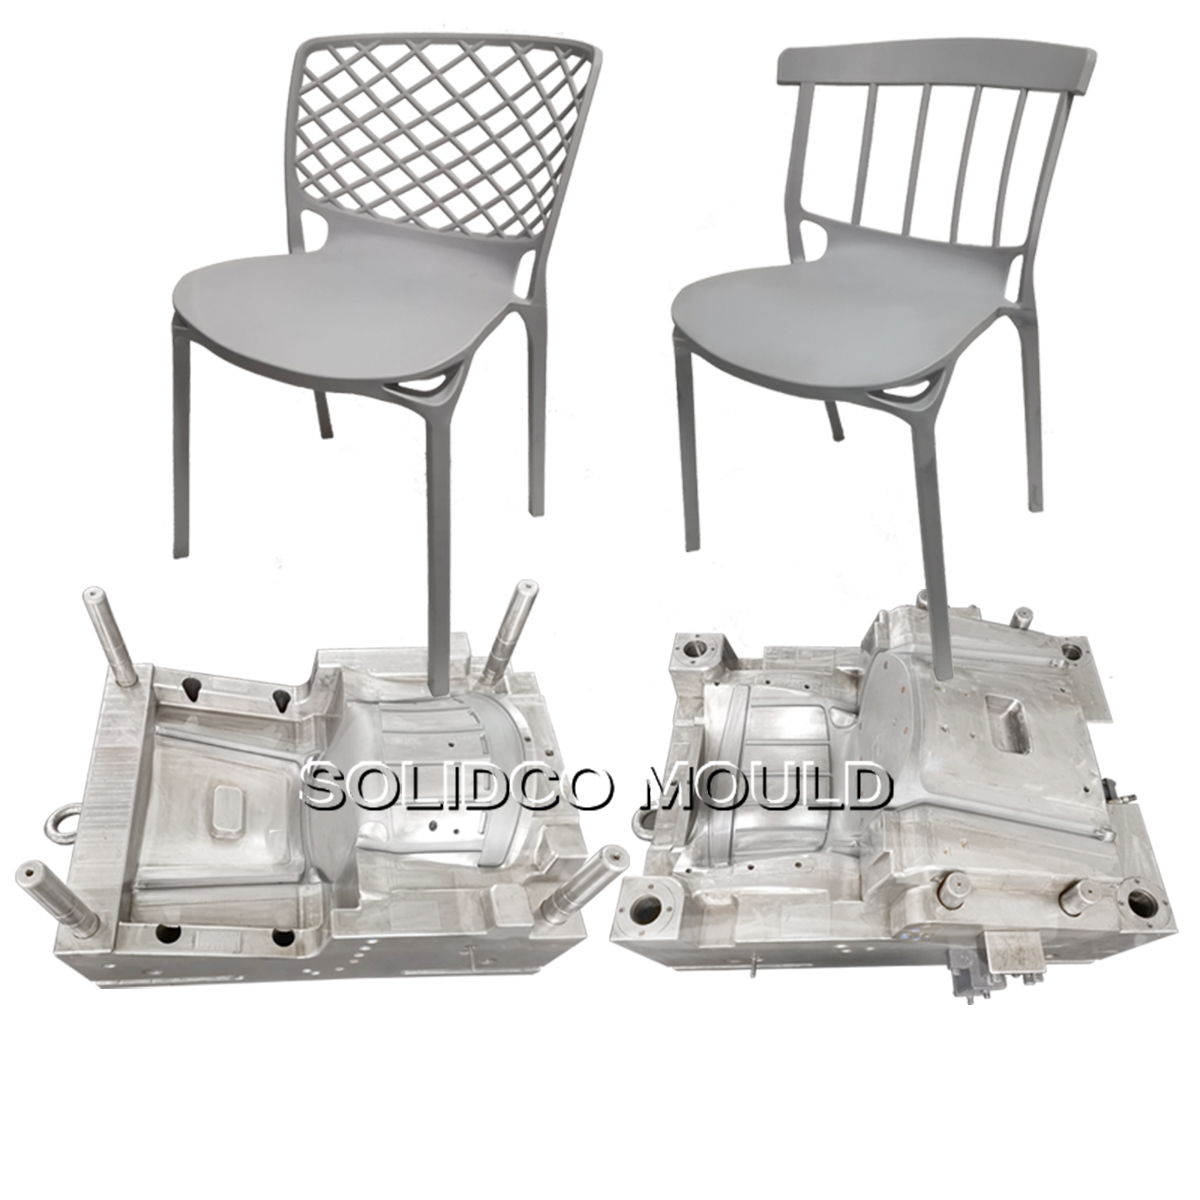 High quality Plastic injection chair mould with best price